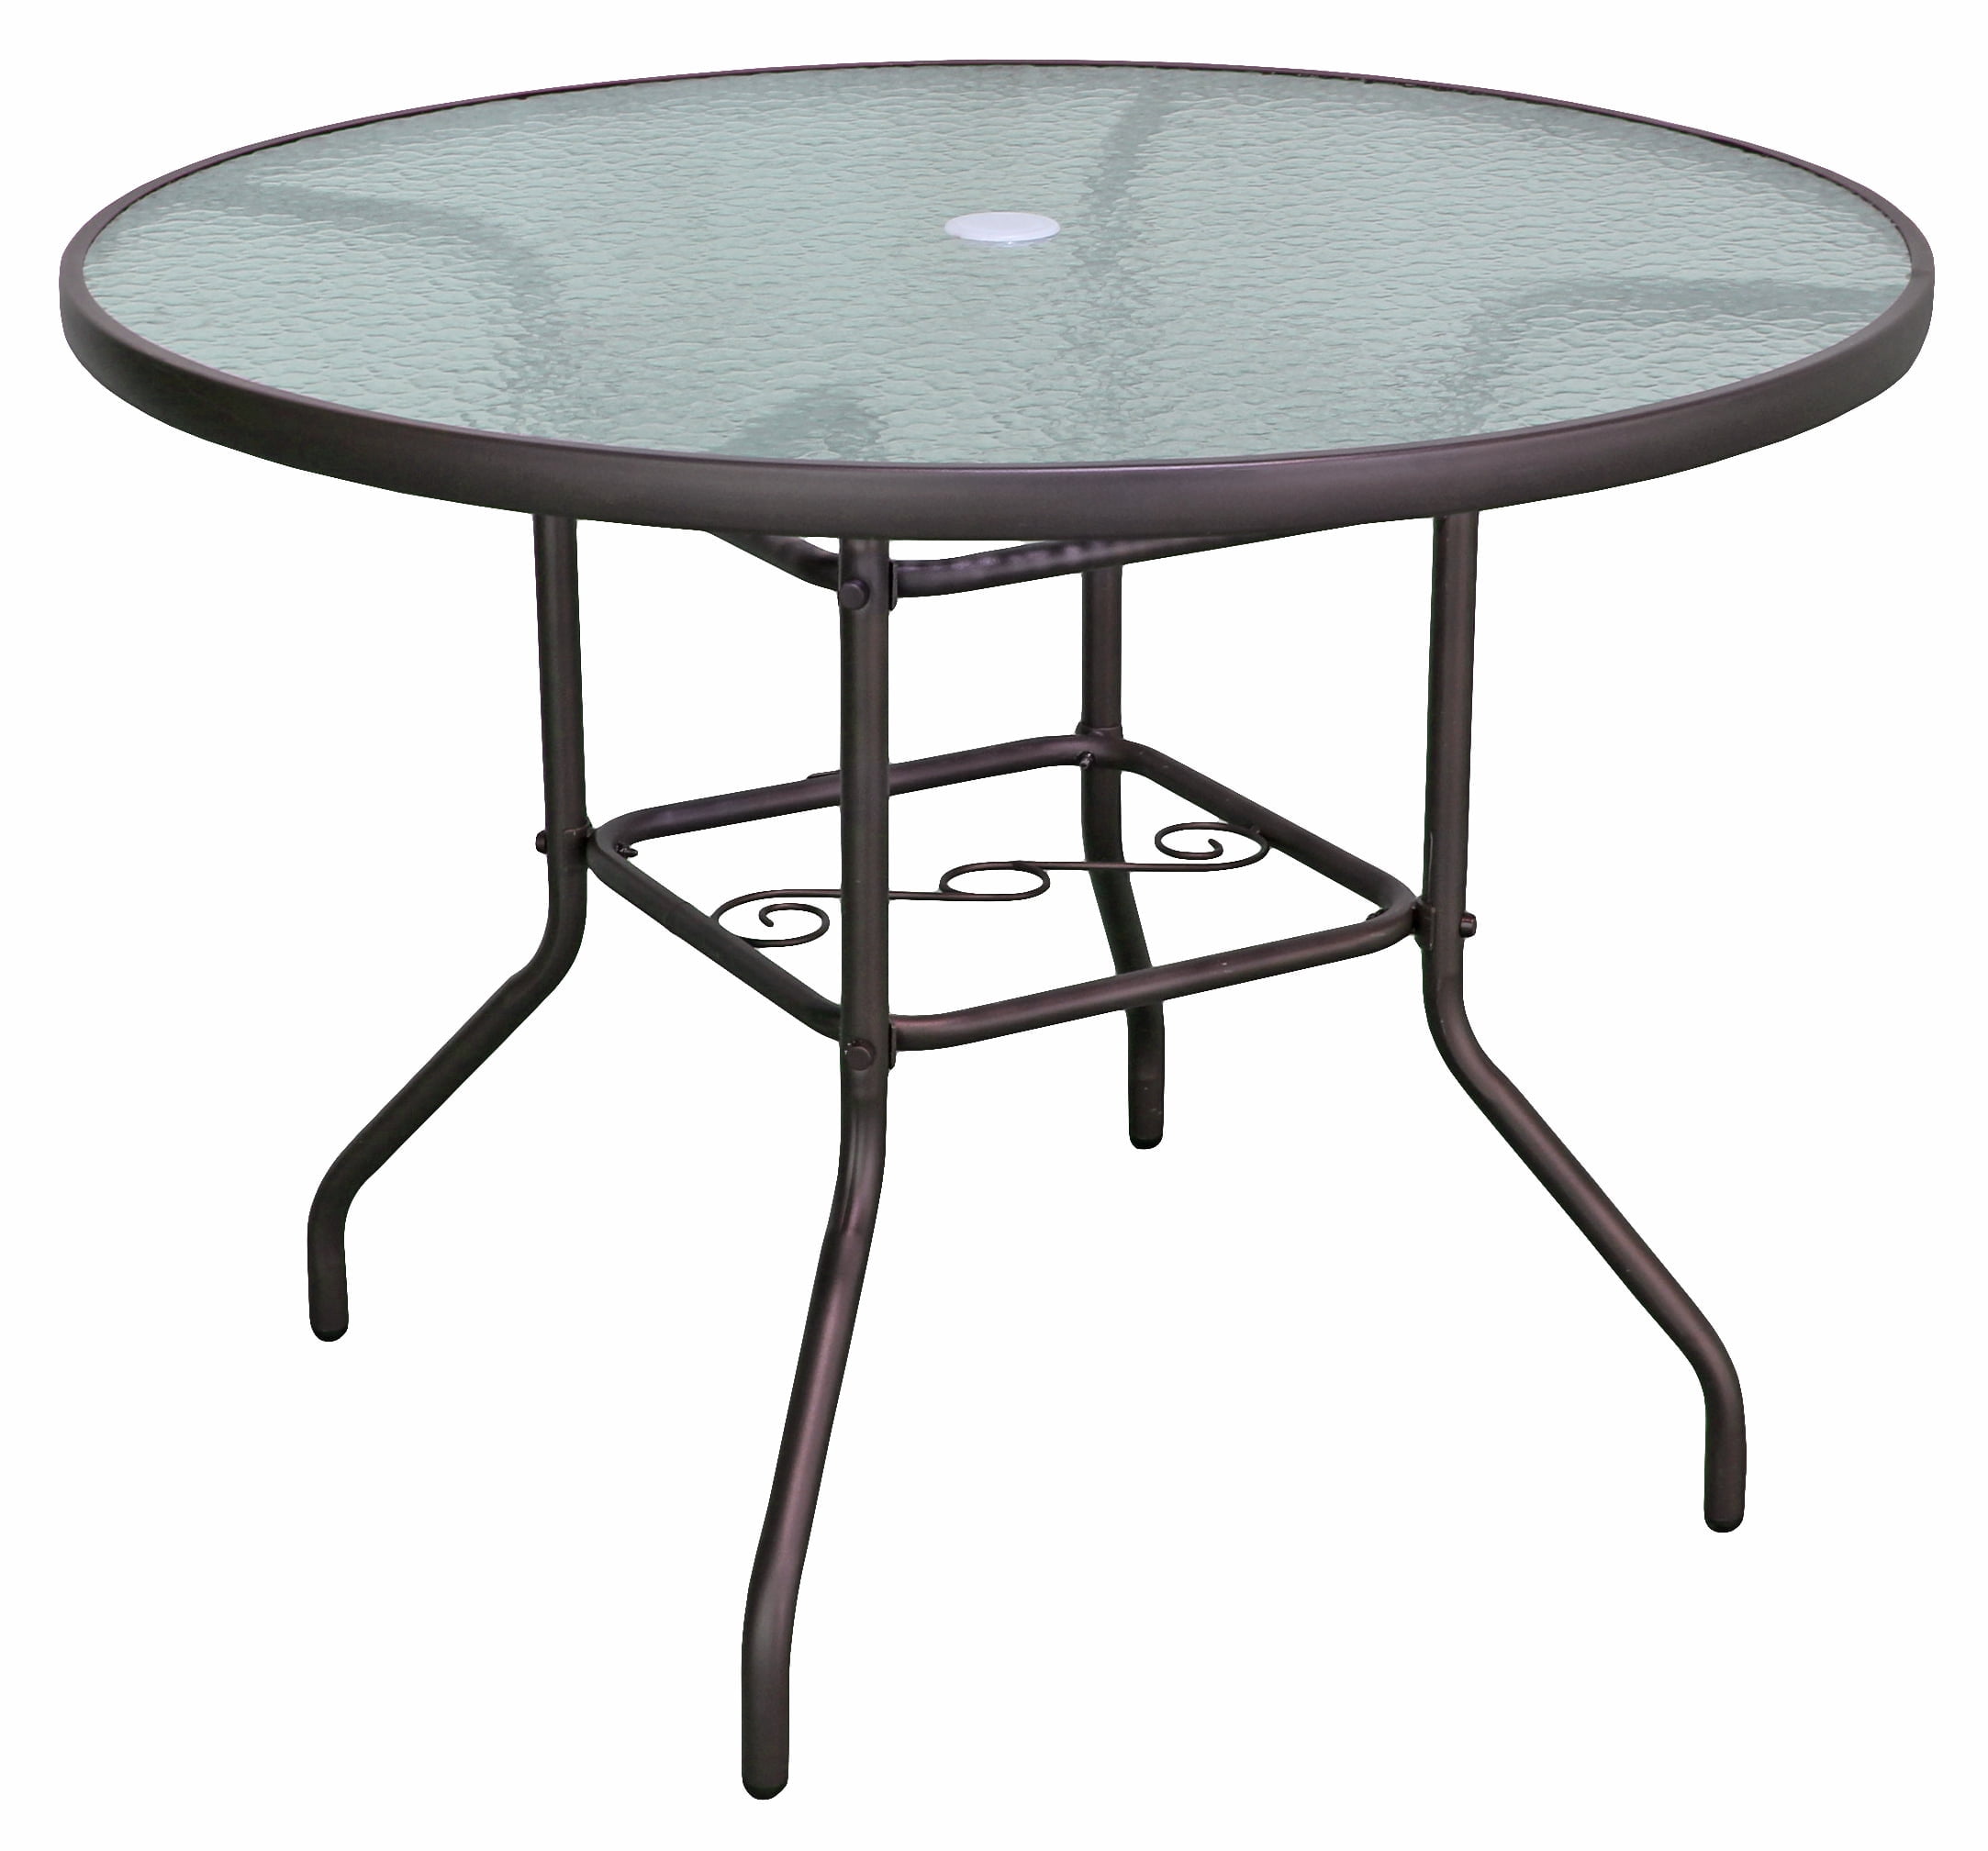 Garden Table 101x68x72 cm Plastic Outdoor patio Camping Table with umbrella hole 